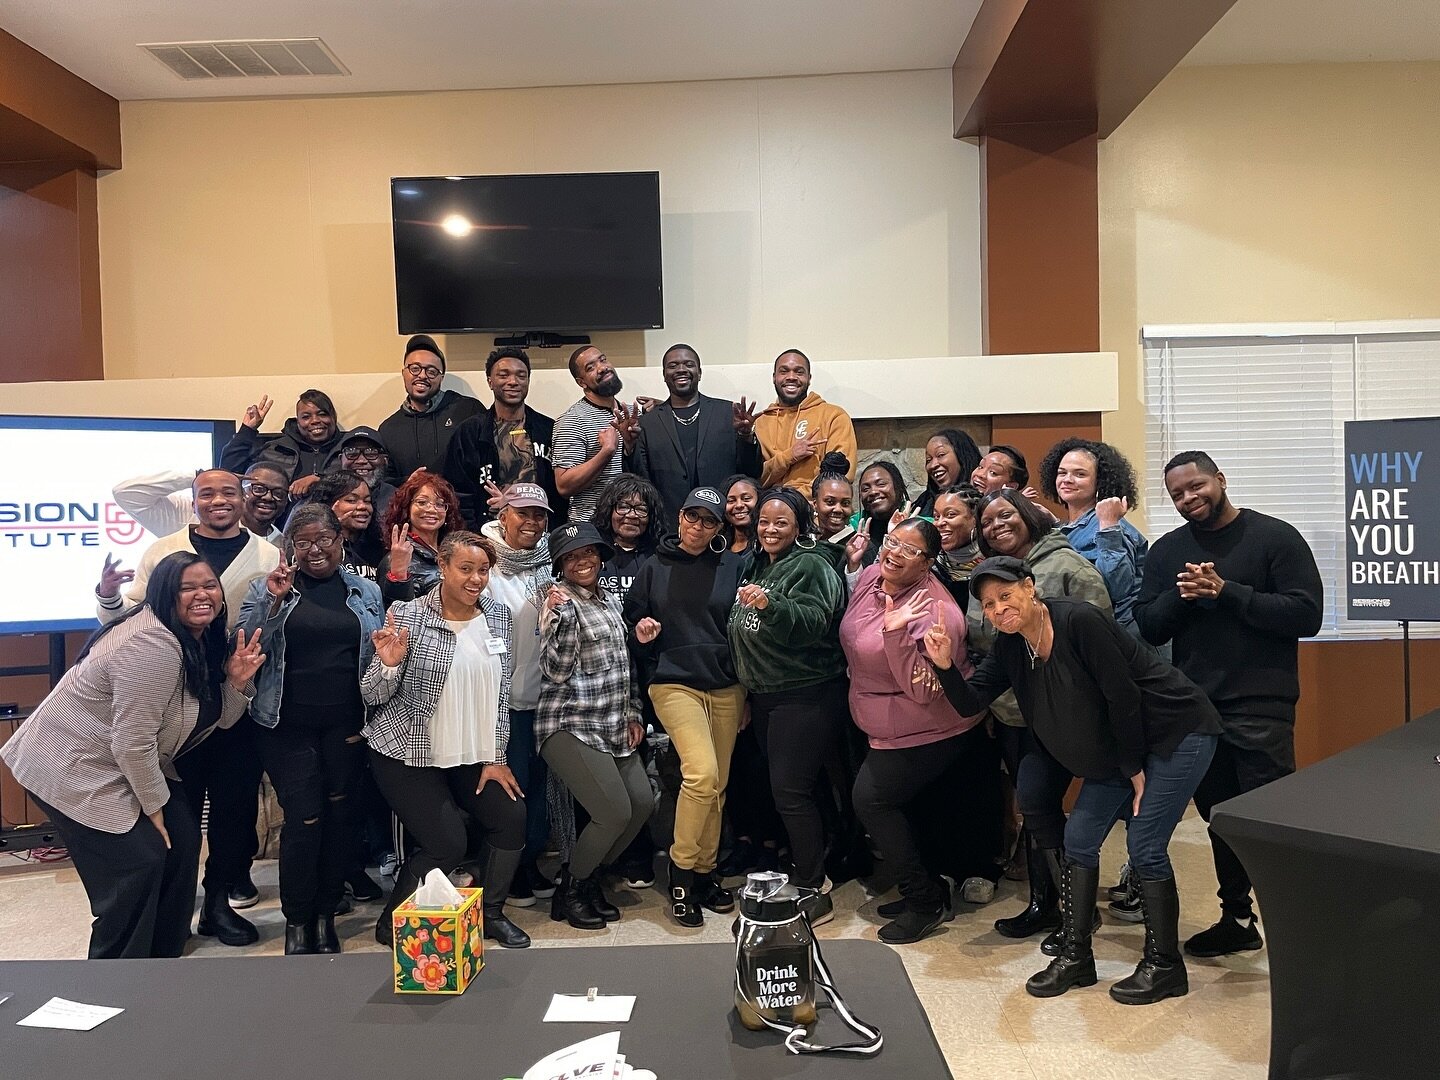 The first Evolve Training of the year is done!! It was so 🔥🔥 and we&rsquo;re excited about seeing the vision and purpose of the 24 amazing people who showed up today come alive and change the world. #mypurposeisthesolution DM us if you want the fre